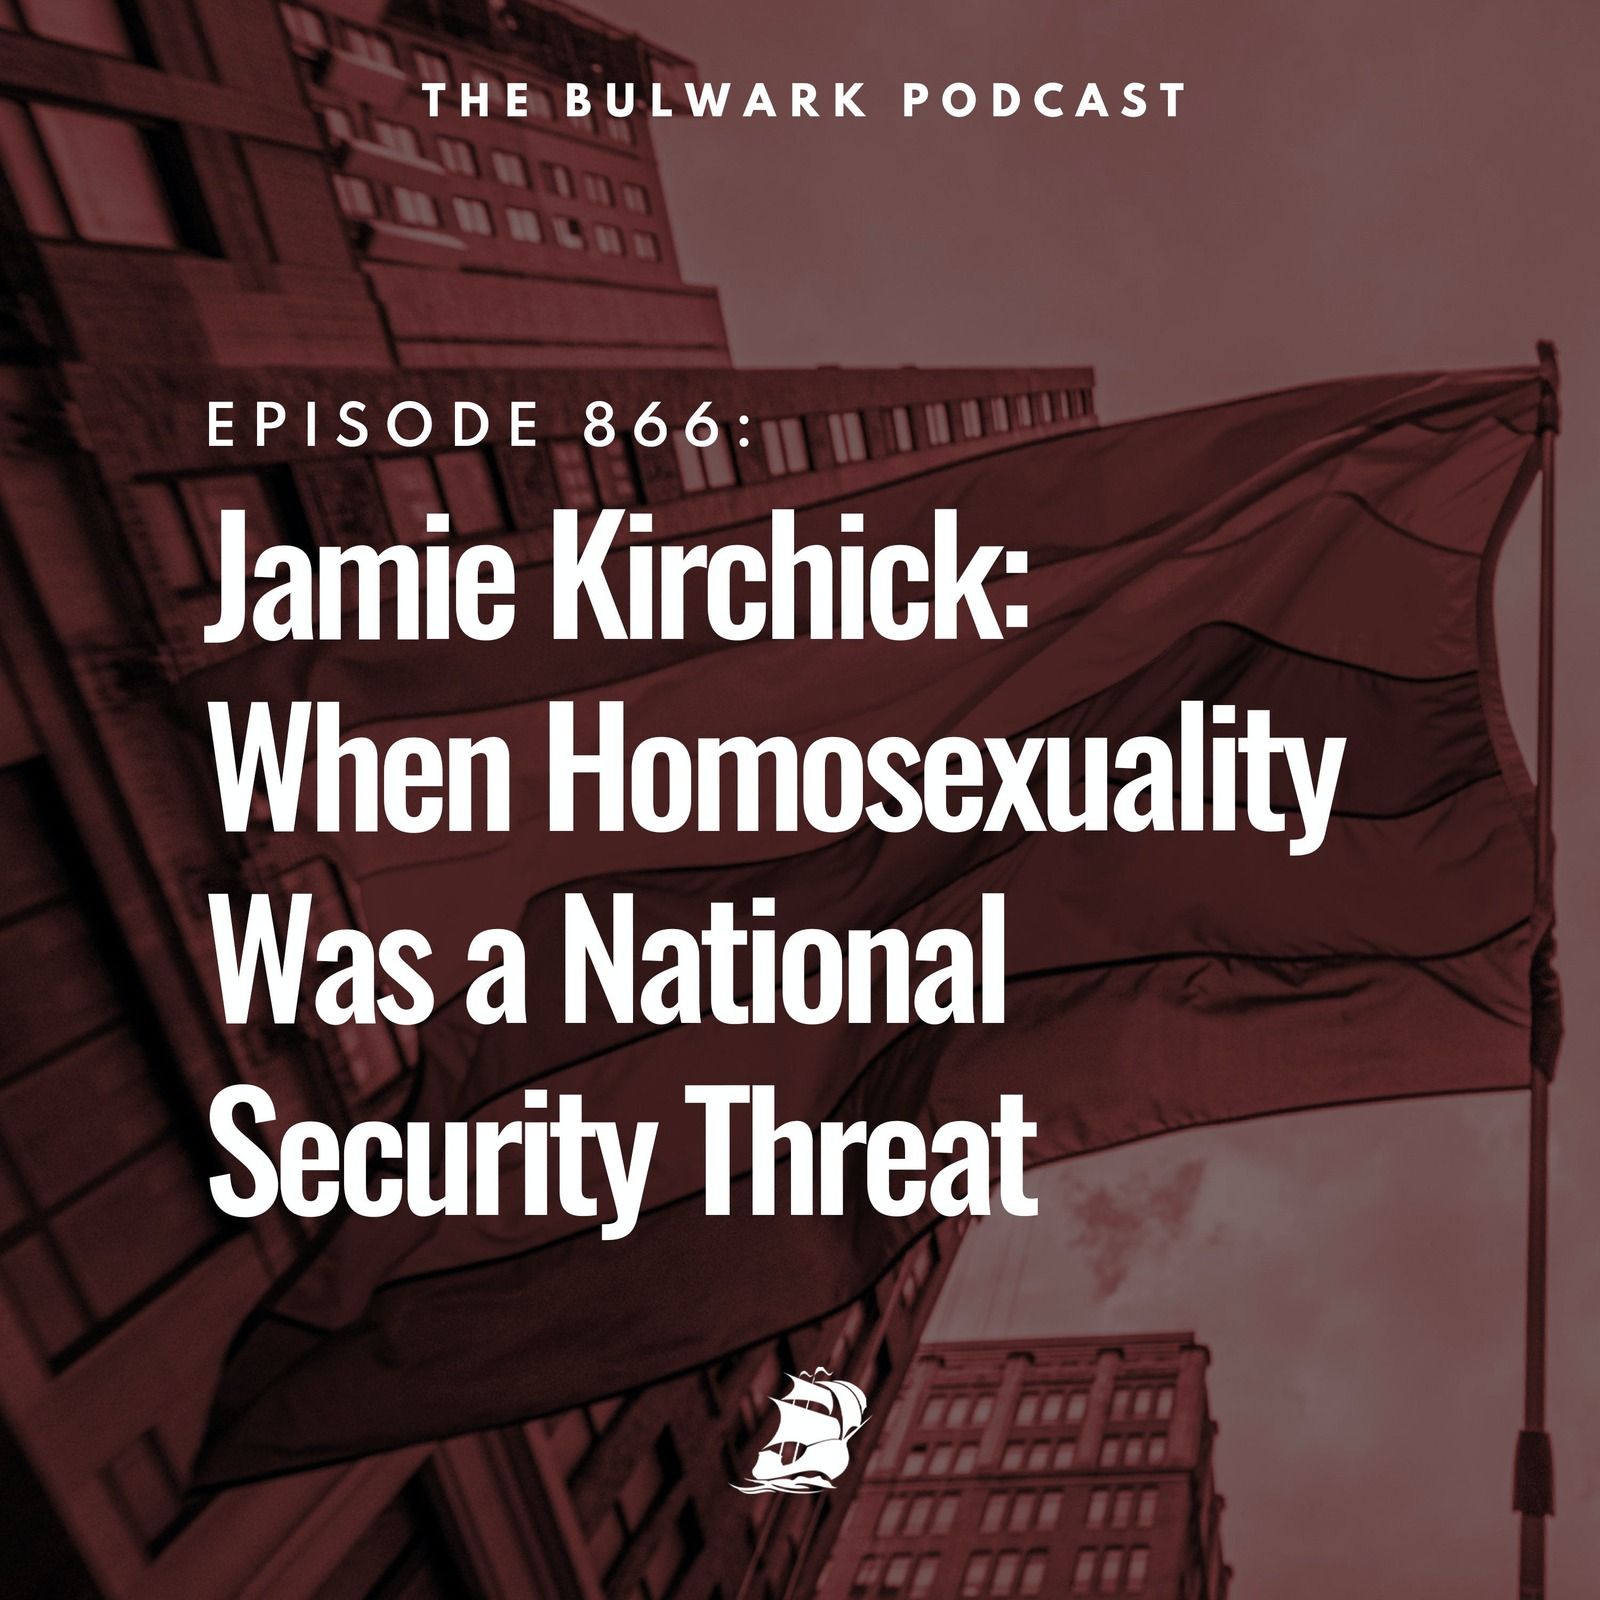 Jamie Kirchick: When Homosexuality Was a National Security Threat